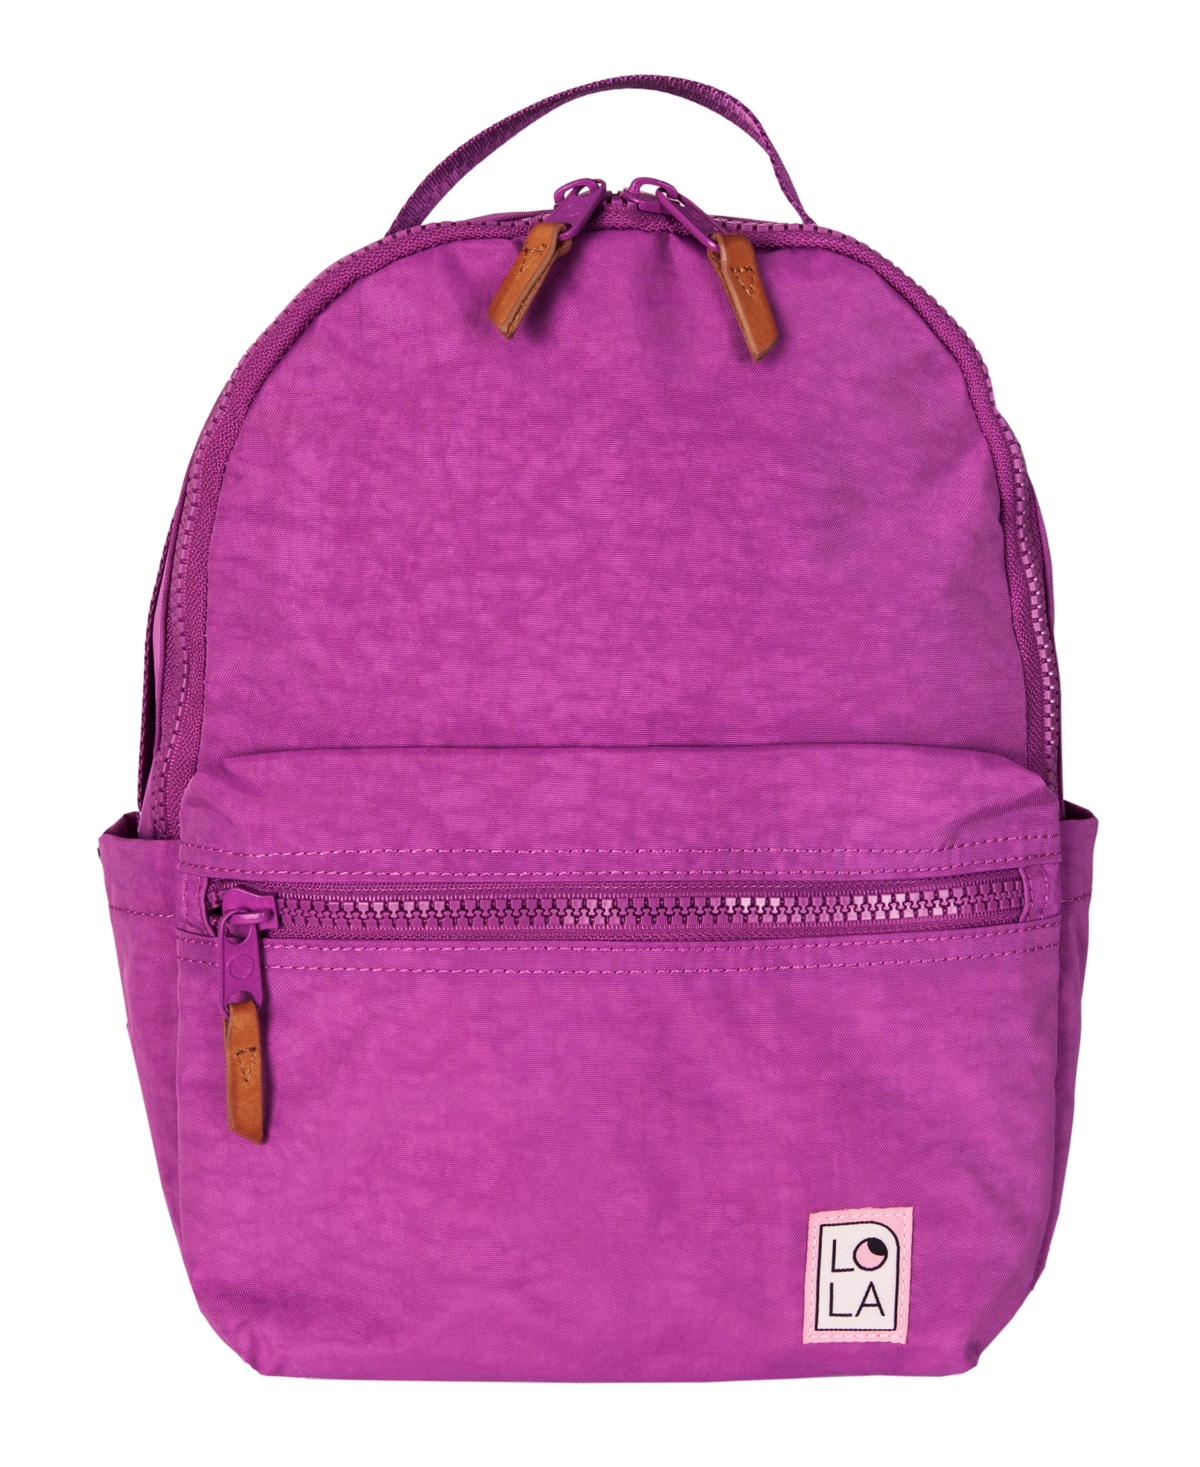 Lola Starchild Small Backpack In Punch